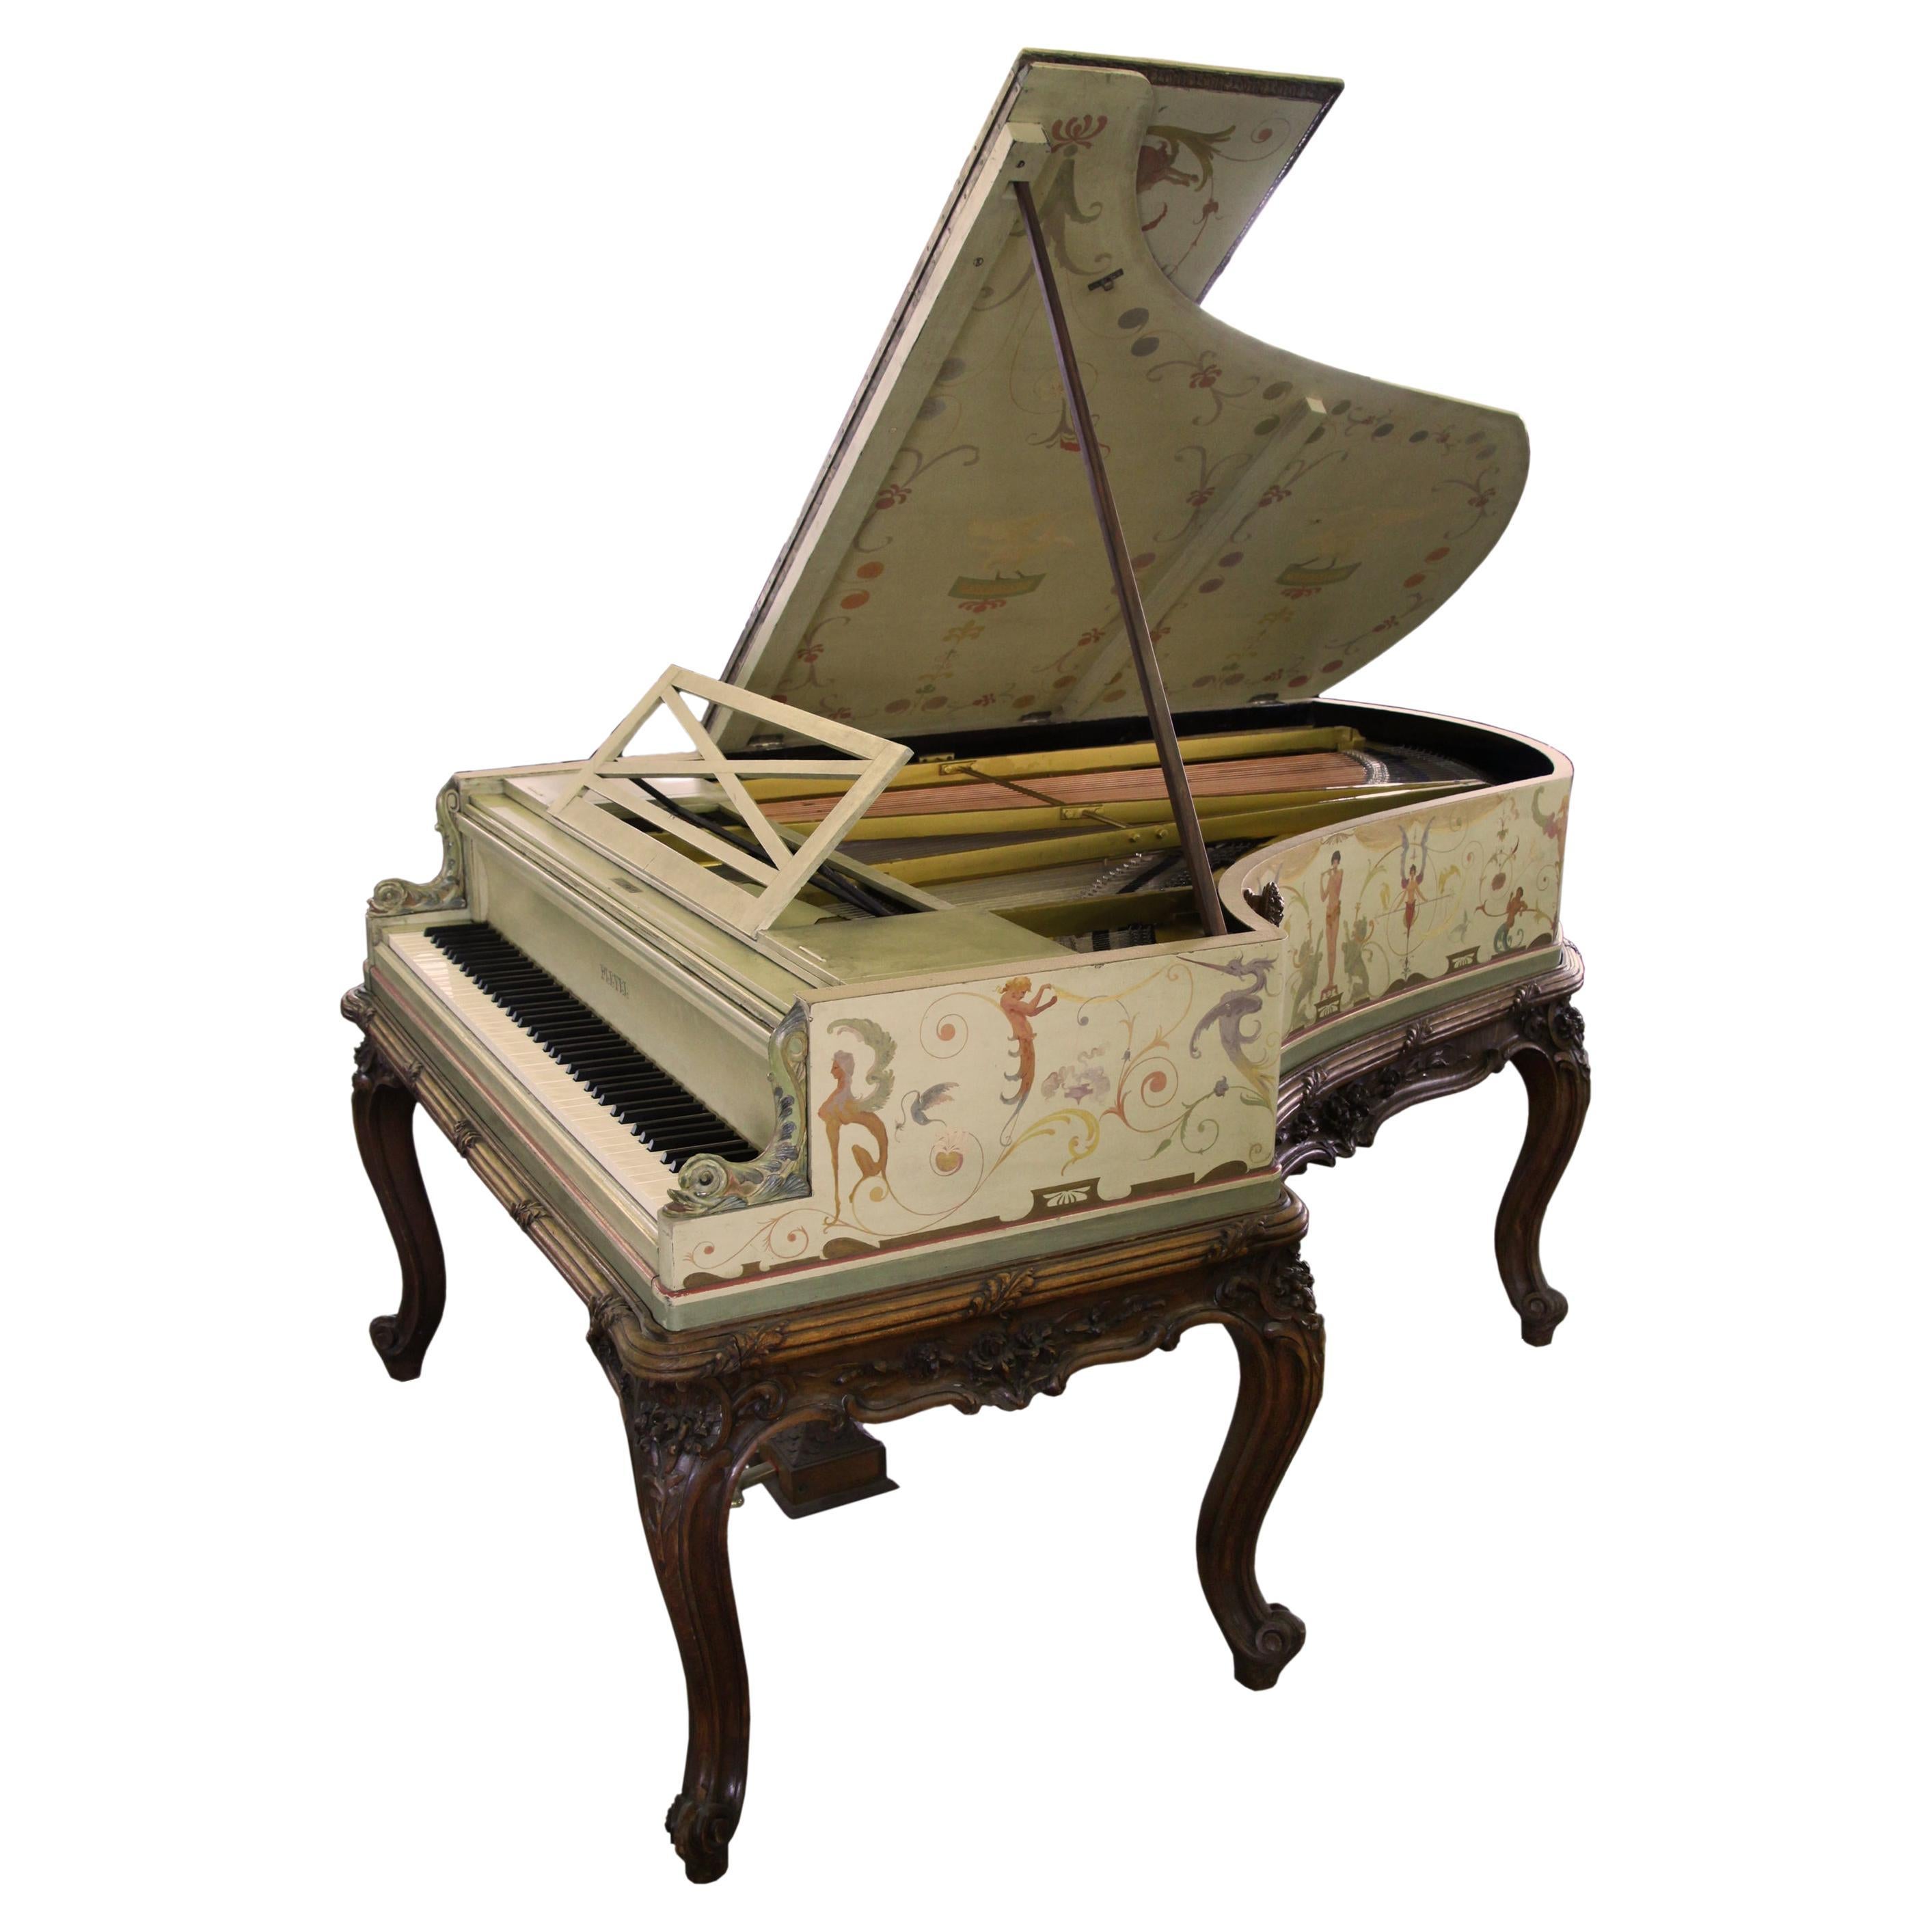 Pleyel Grand Piano Hand-Painted Berainesque Style Cabriole Leg Signed G. Meunier For Sale